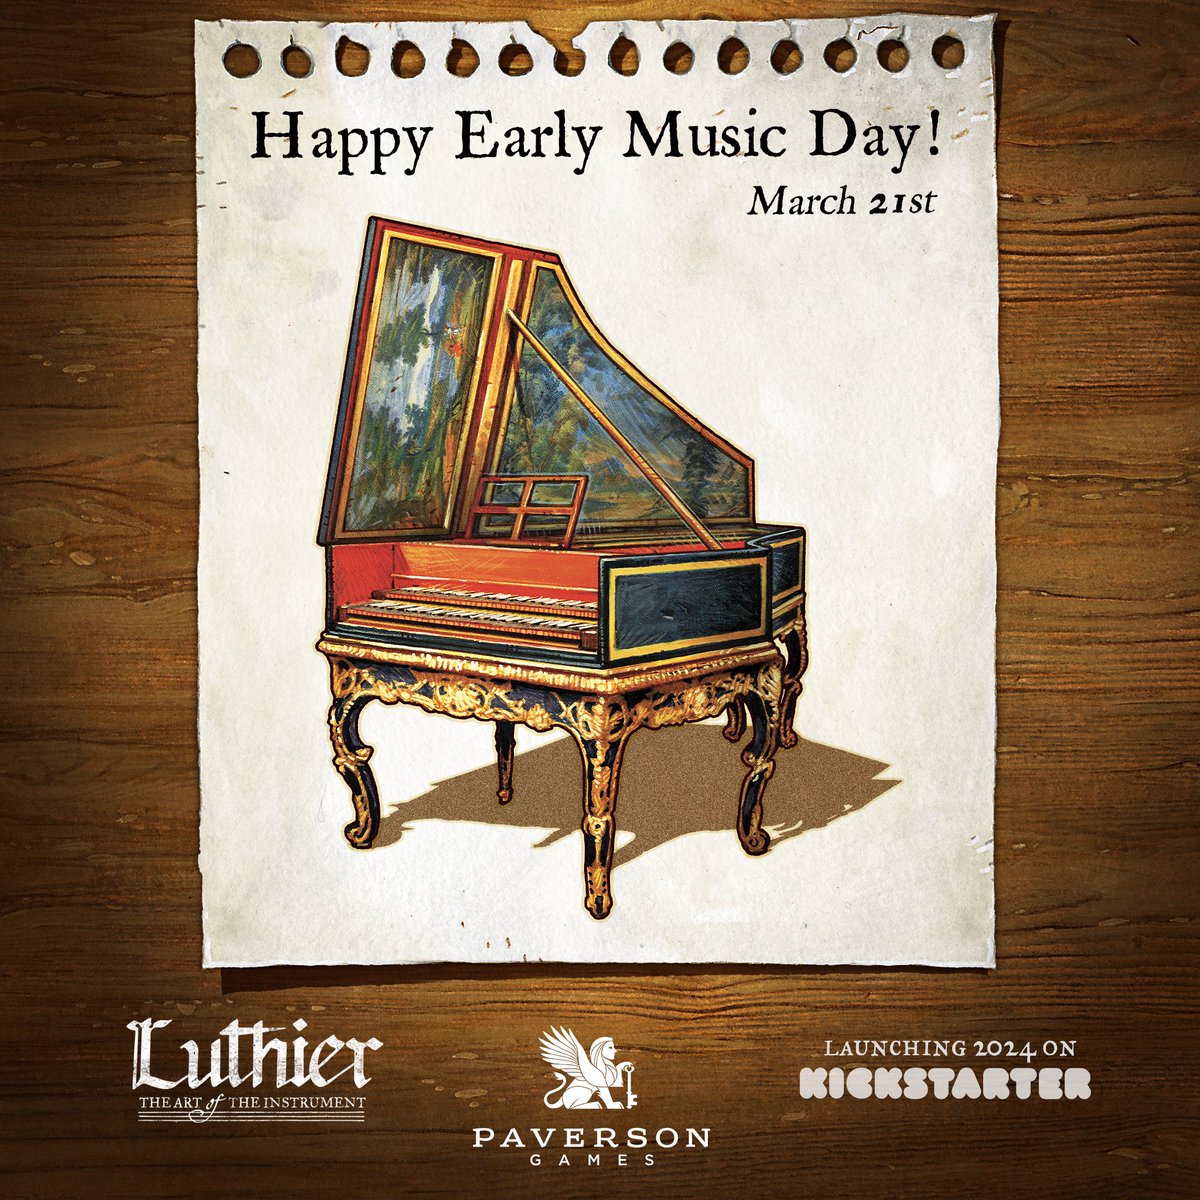 Happy #EarlyMusicDay, as we celebrate the #harpsichord!🎶Join us for our board game, #Luthier, coming to #Kickstarter in 2024! Listen to this #Bach piece:  youtu.be/9foCM8GY-YI?si… 🎹#musicalinstrument #earlymusic #orchestra #baroque #classicalmusic #music #chambermusic #symphony